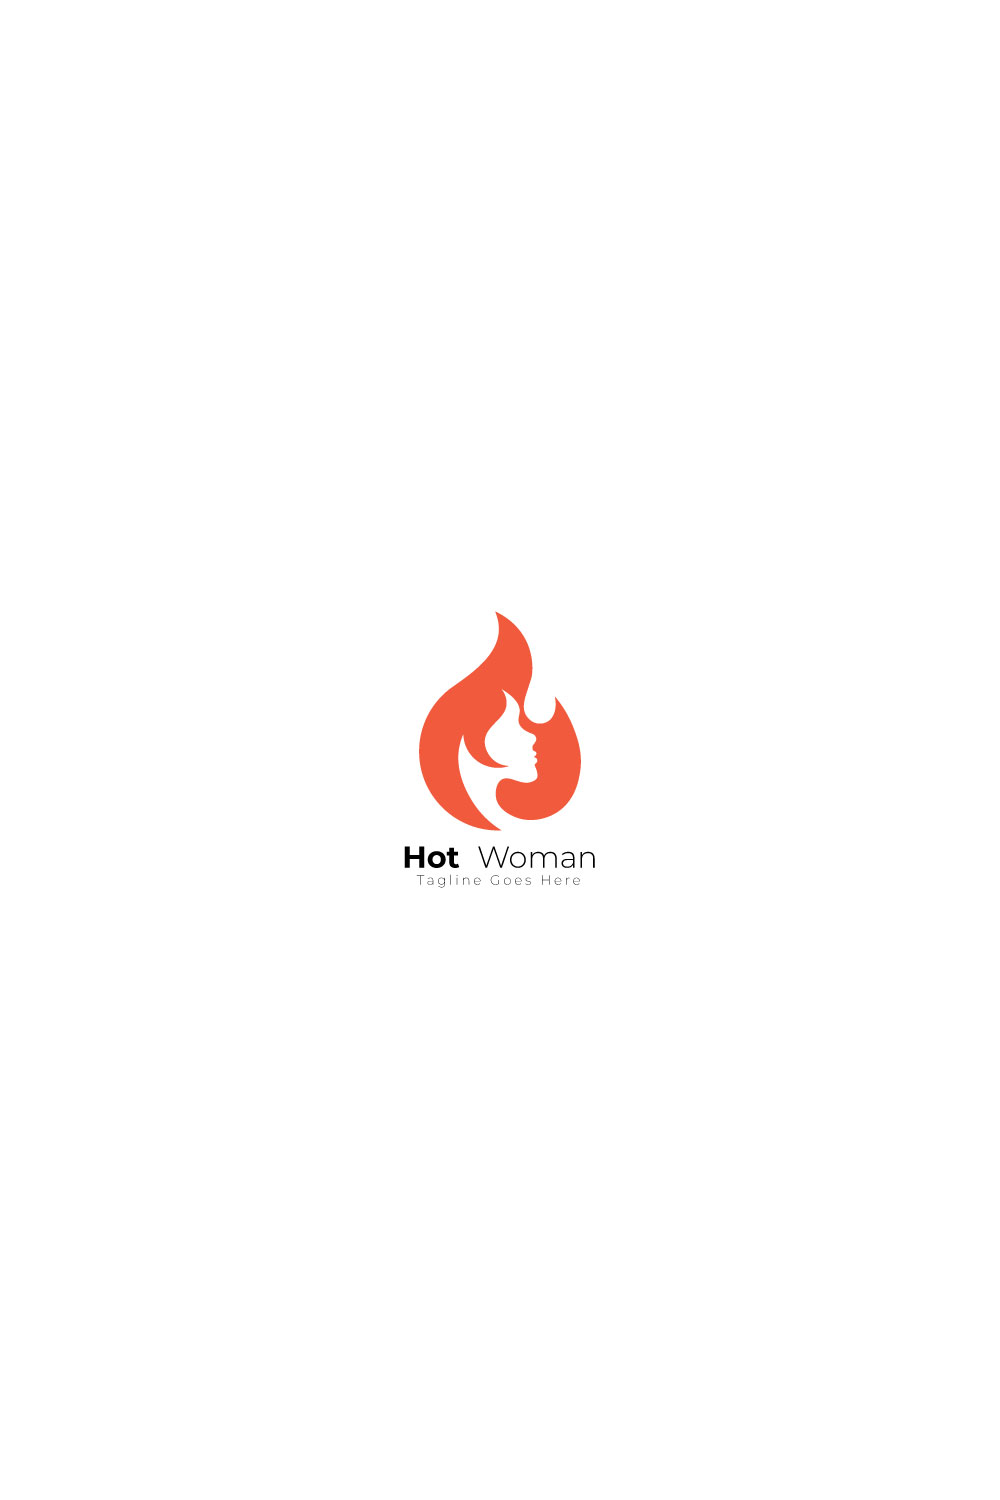 Beauty Fire lady logo icon illustration pinterest preview image.